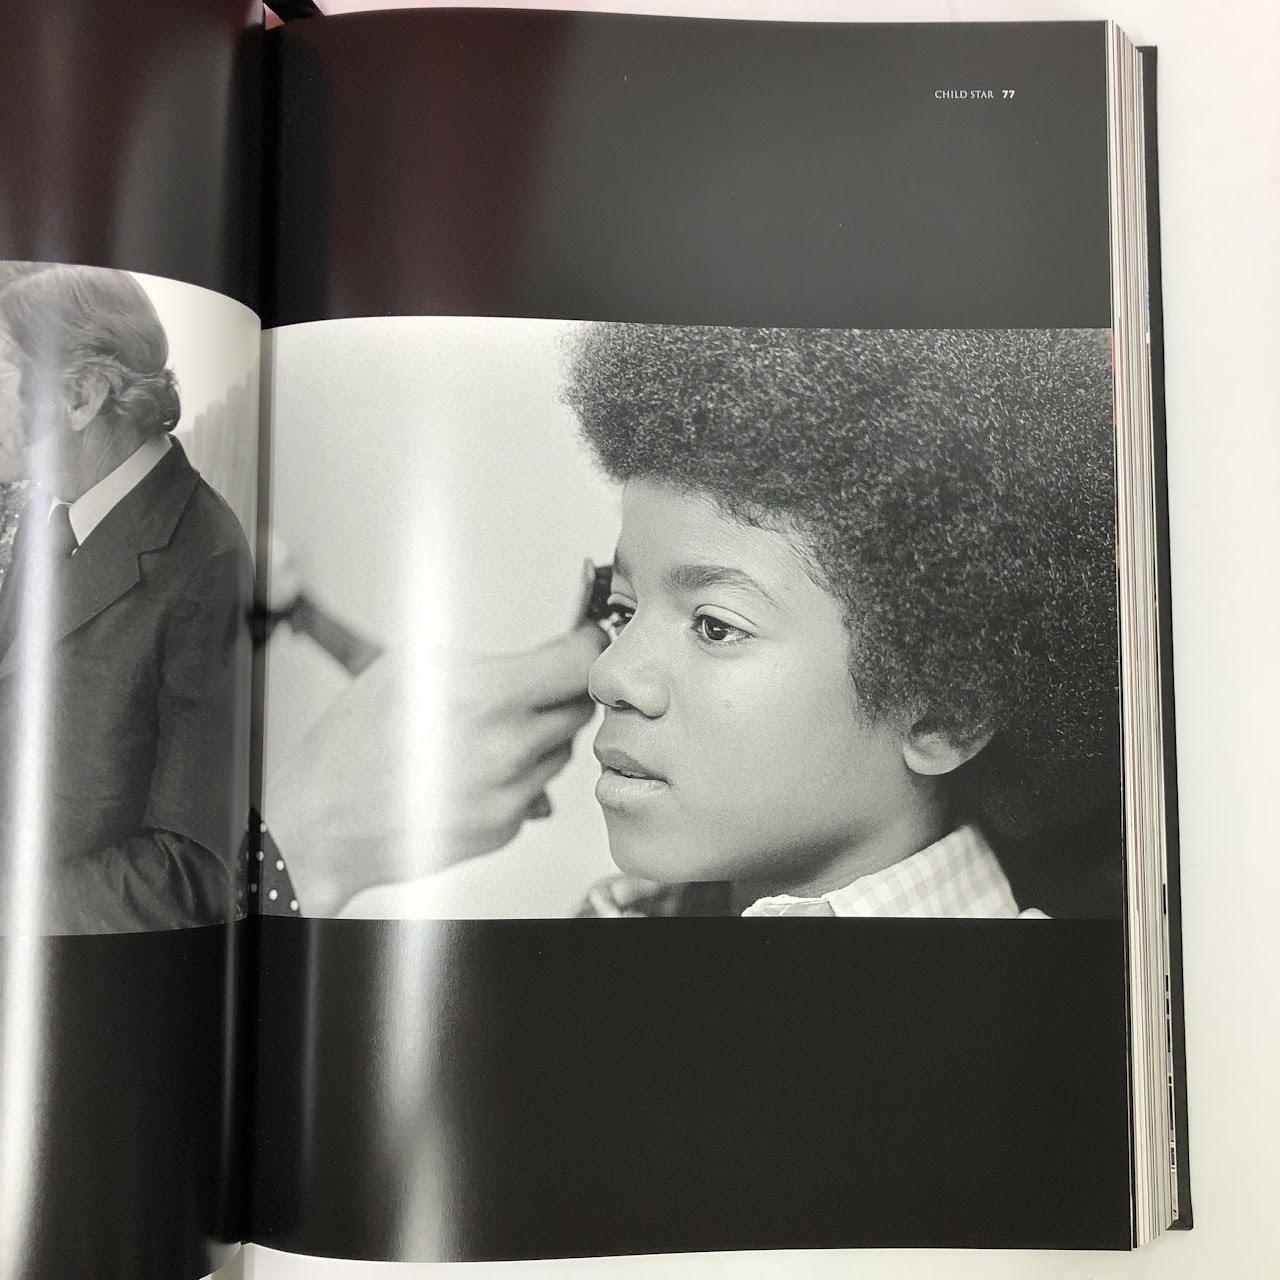 The Official Michael Jackson Opus Large Collector Table Book